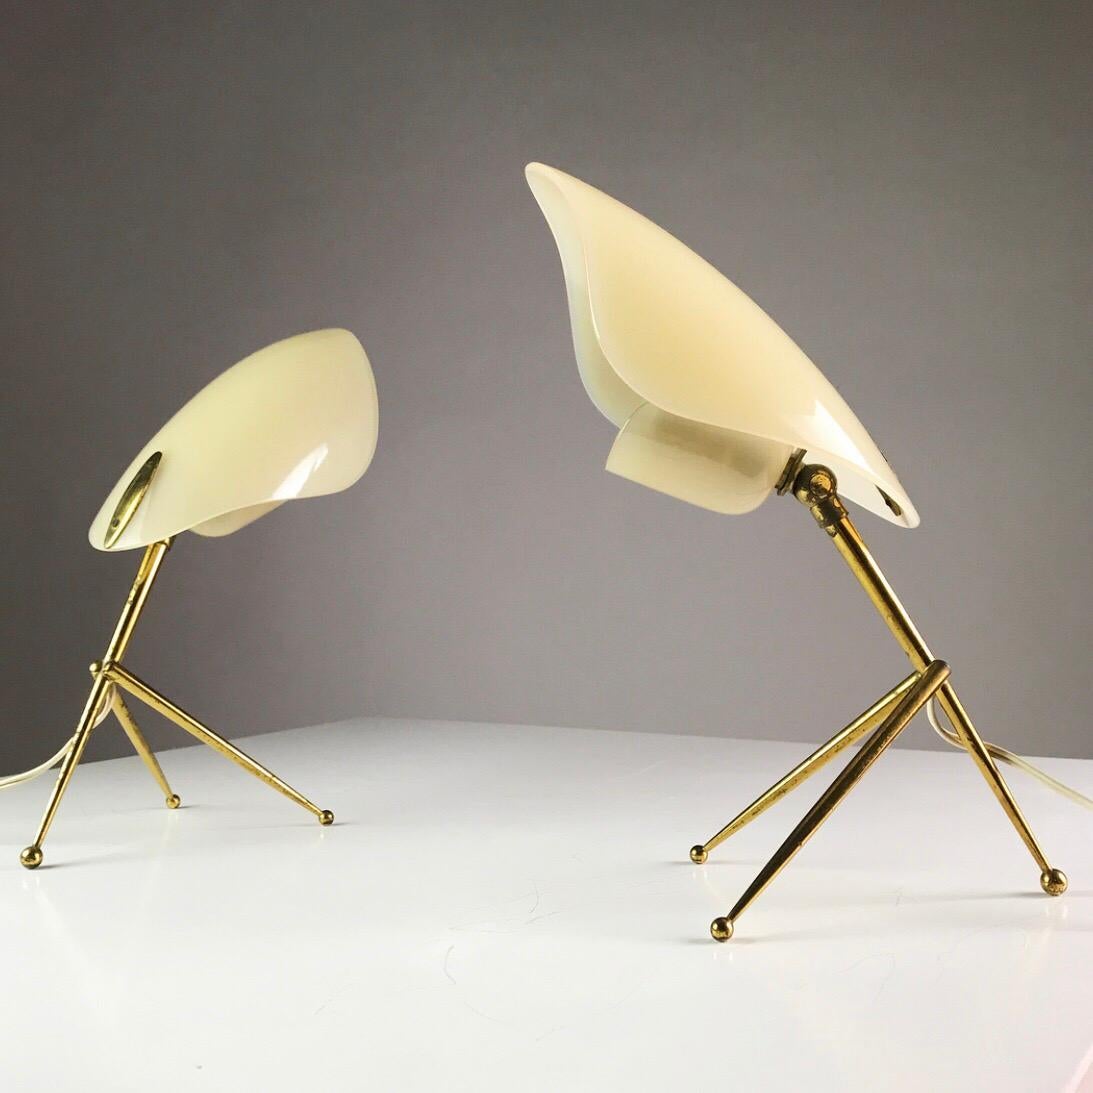 Made in the 1950s by WKR Offenbach am Main in Germany. 

Elegant and sophisticated table lights from the Stilnovo modernistic era made from solid brass and thick off white perspex shades. 

The shape of the large perspex reminds of the leaf and